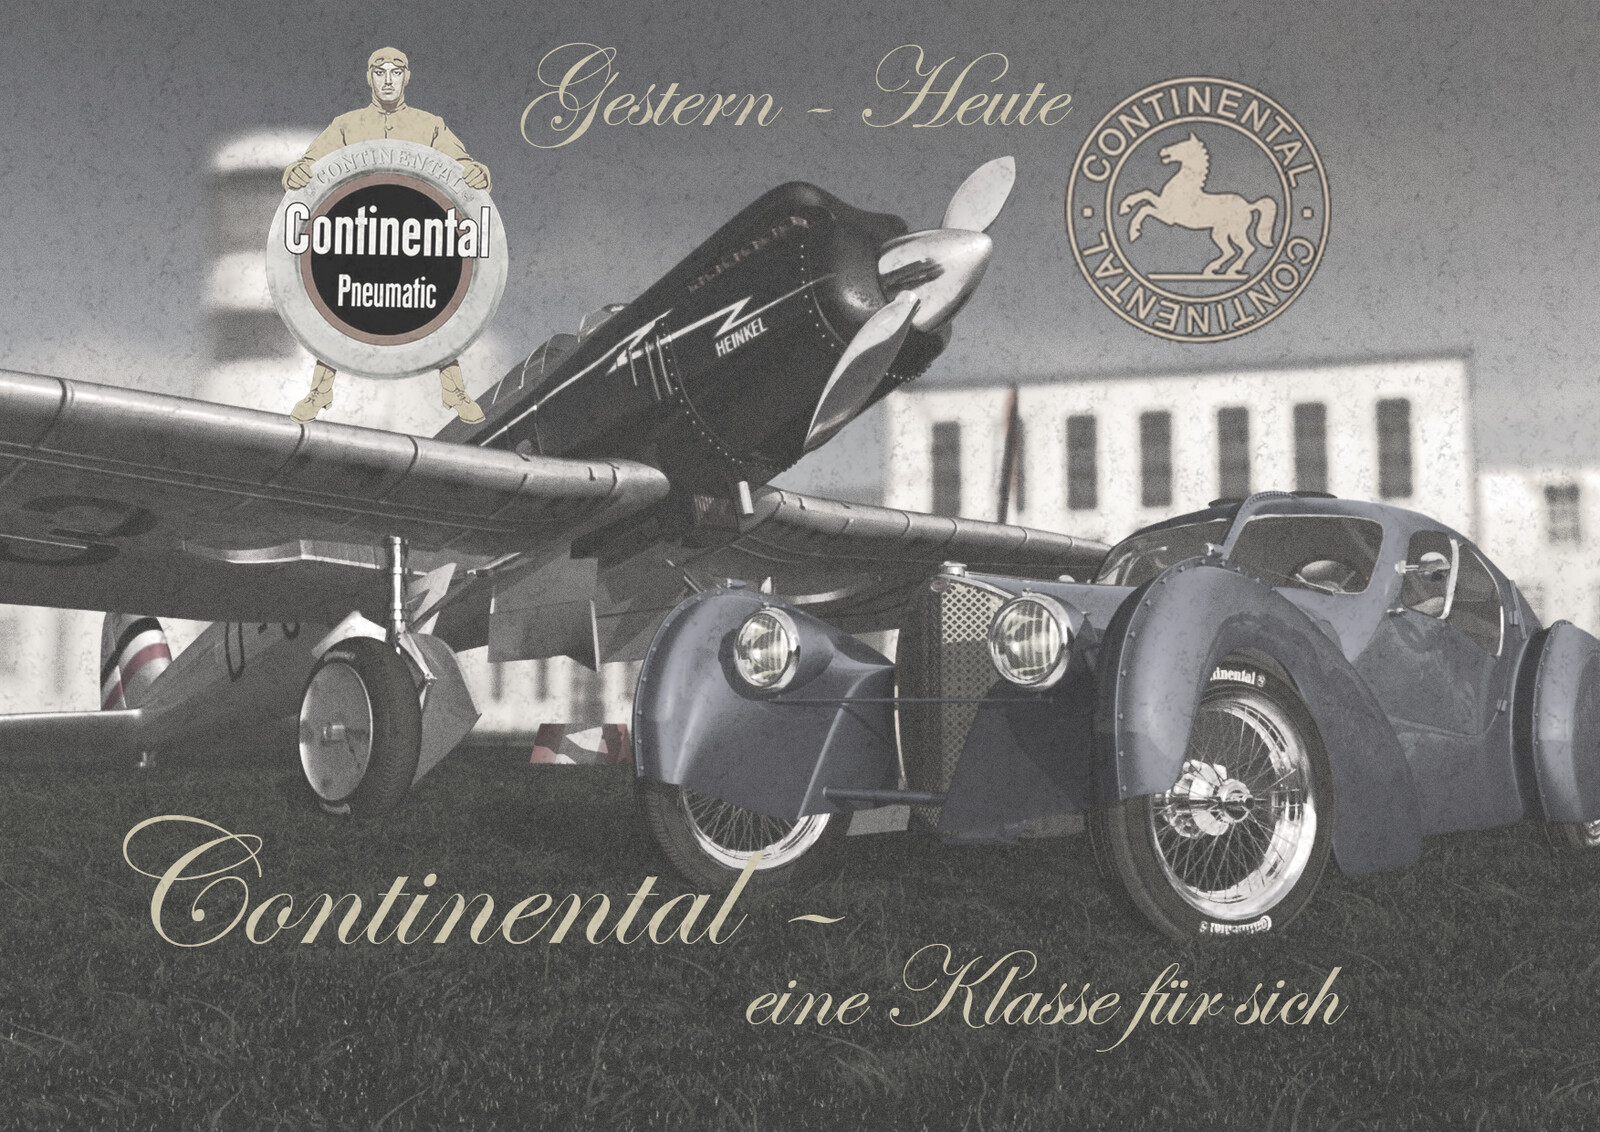 Heinkel HE 70 Blitz Schnell airliner and Bugatti Type 57 with Continental tires on an advertising poster of the 30s